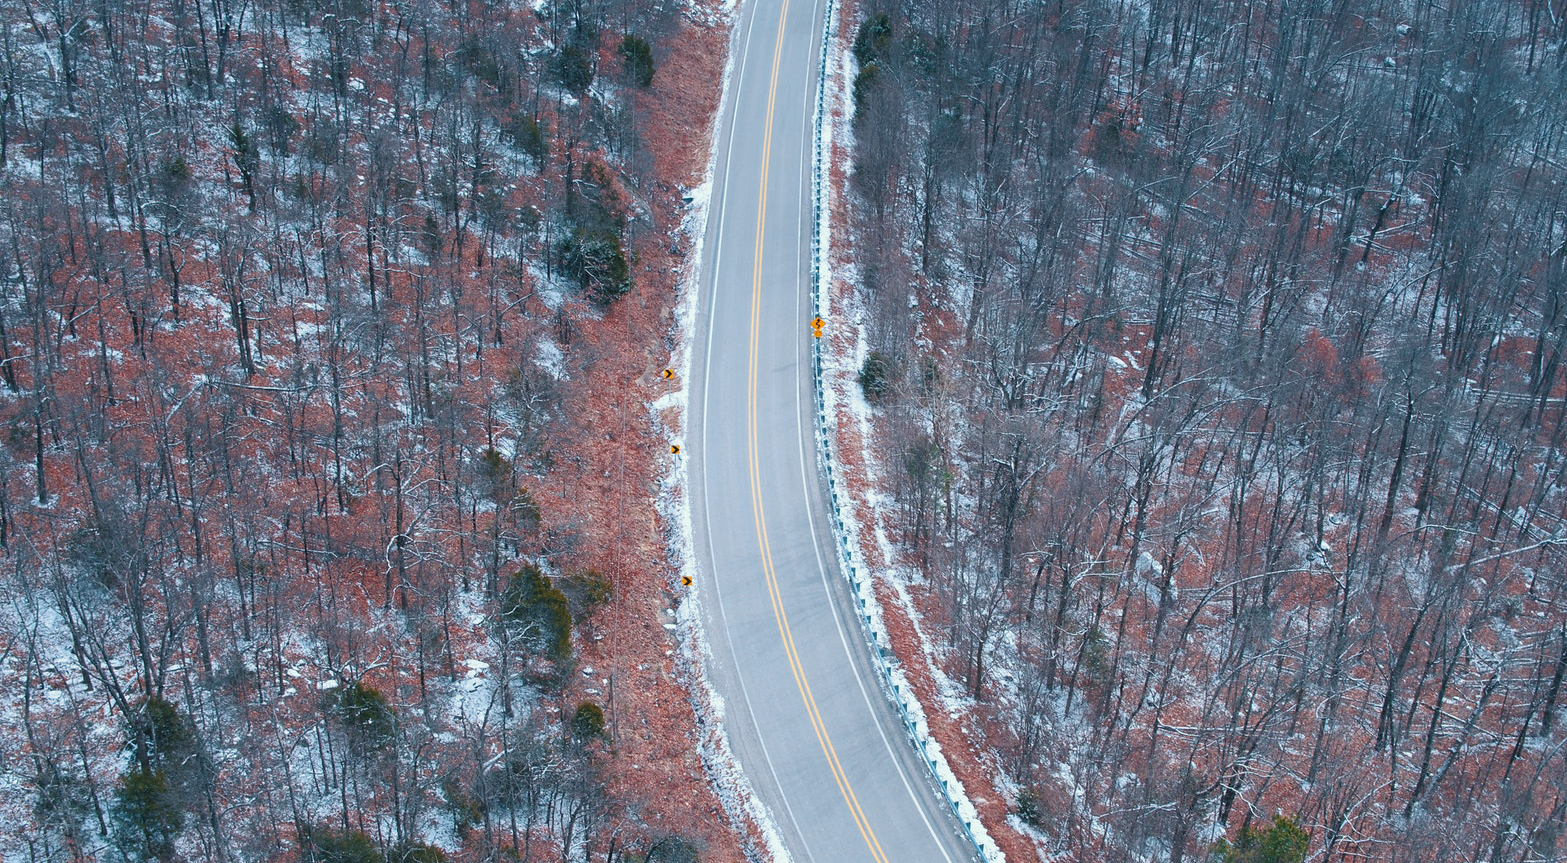 A curving road through a winter forest.